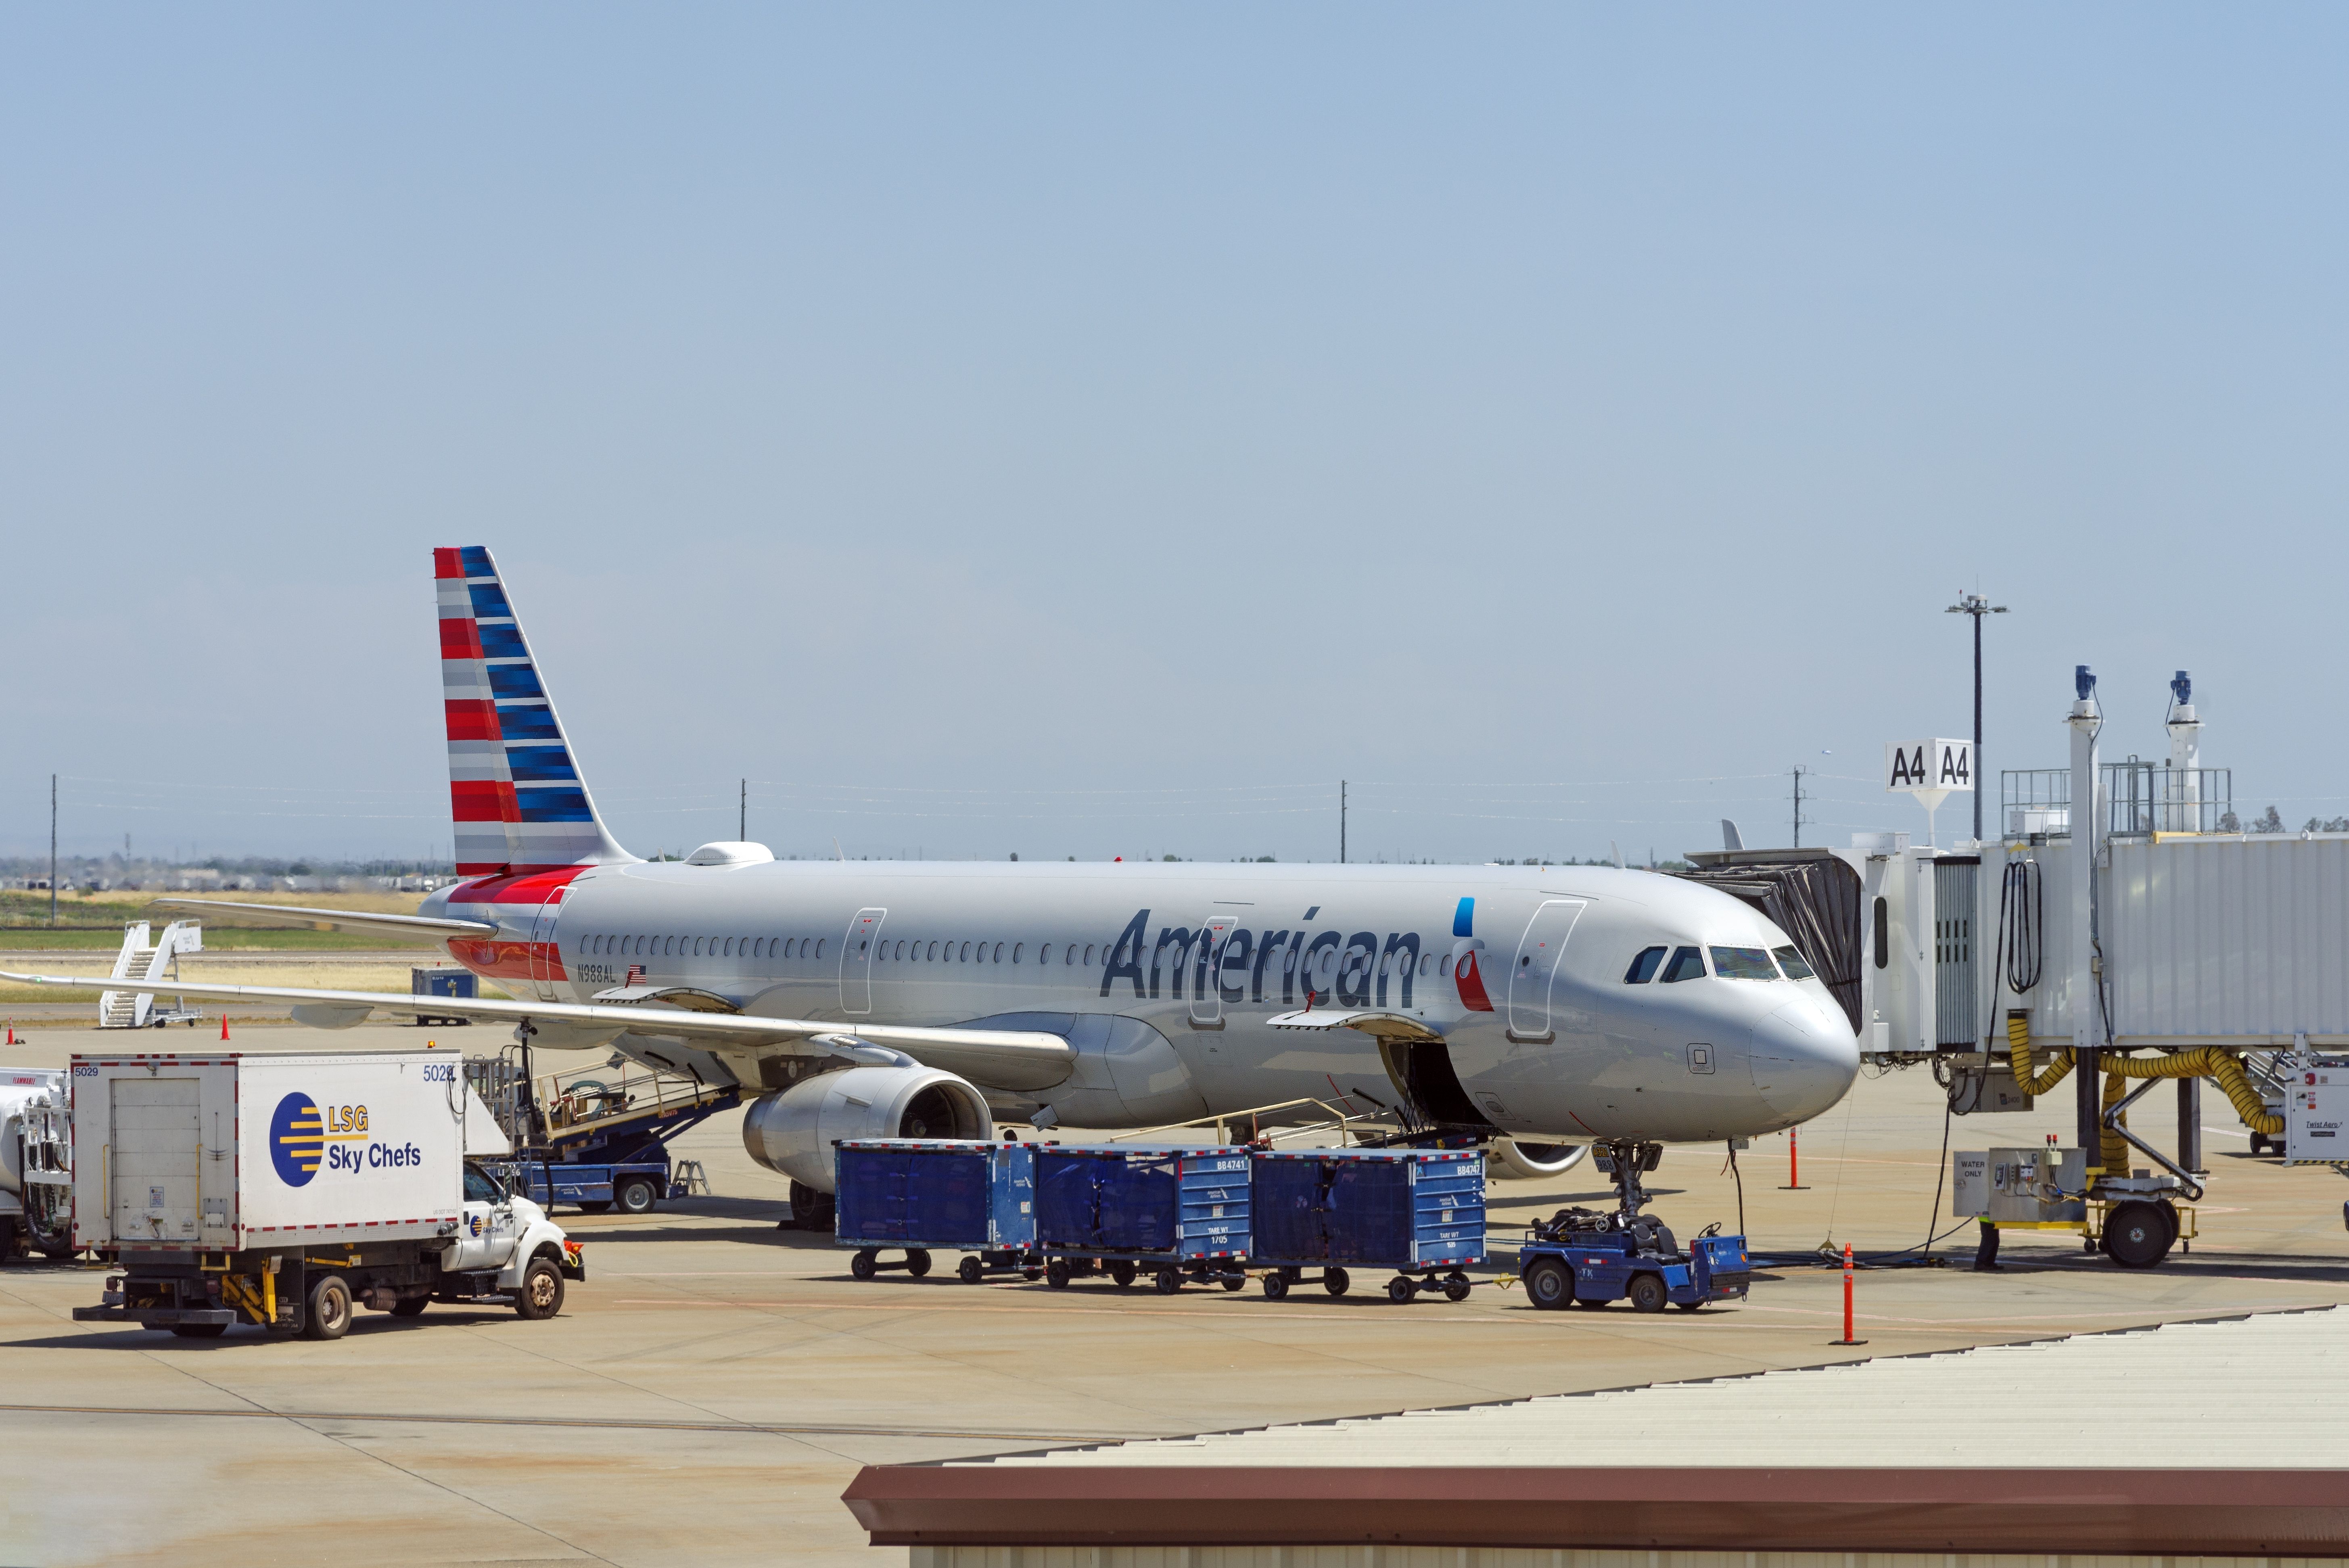 American Airlines Airbus A321-231.